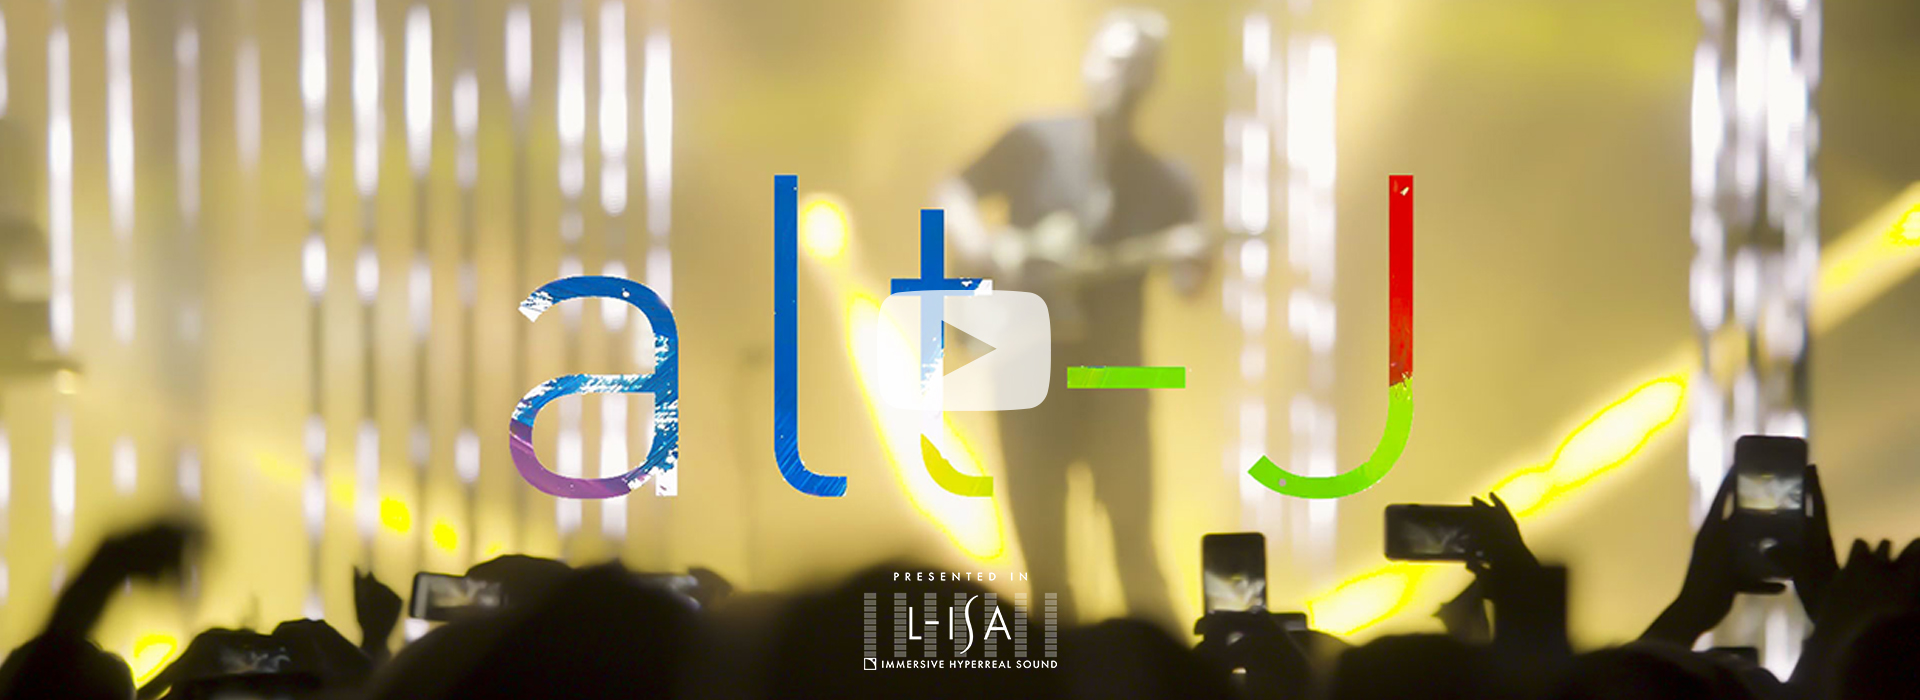 alt-J’s Groundbreaking Surround Sound Show in NYC with L‑ISA Immersive Technology from L‑Acoustics